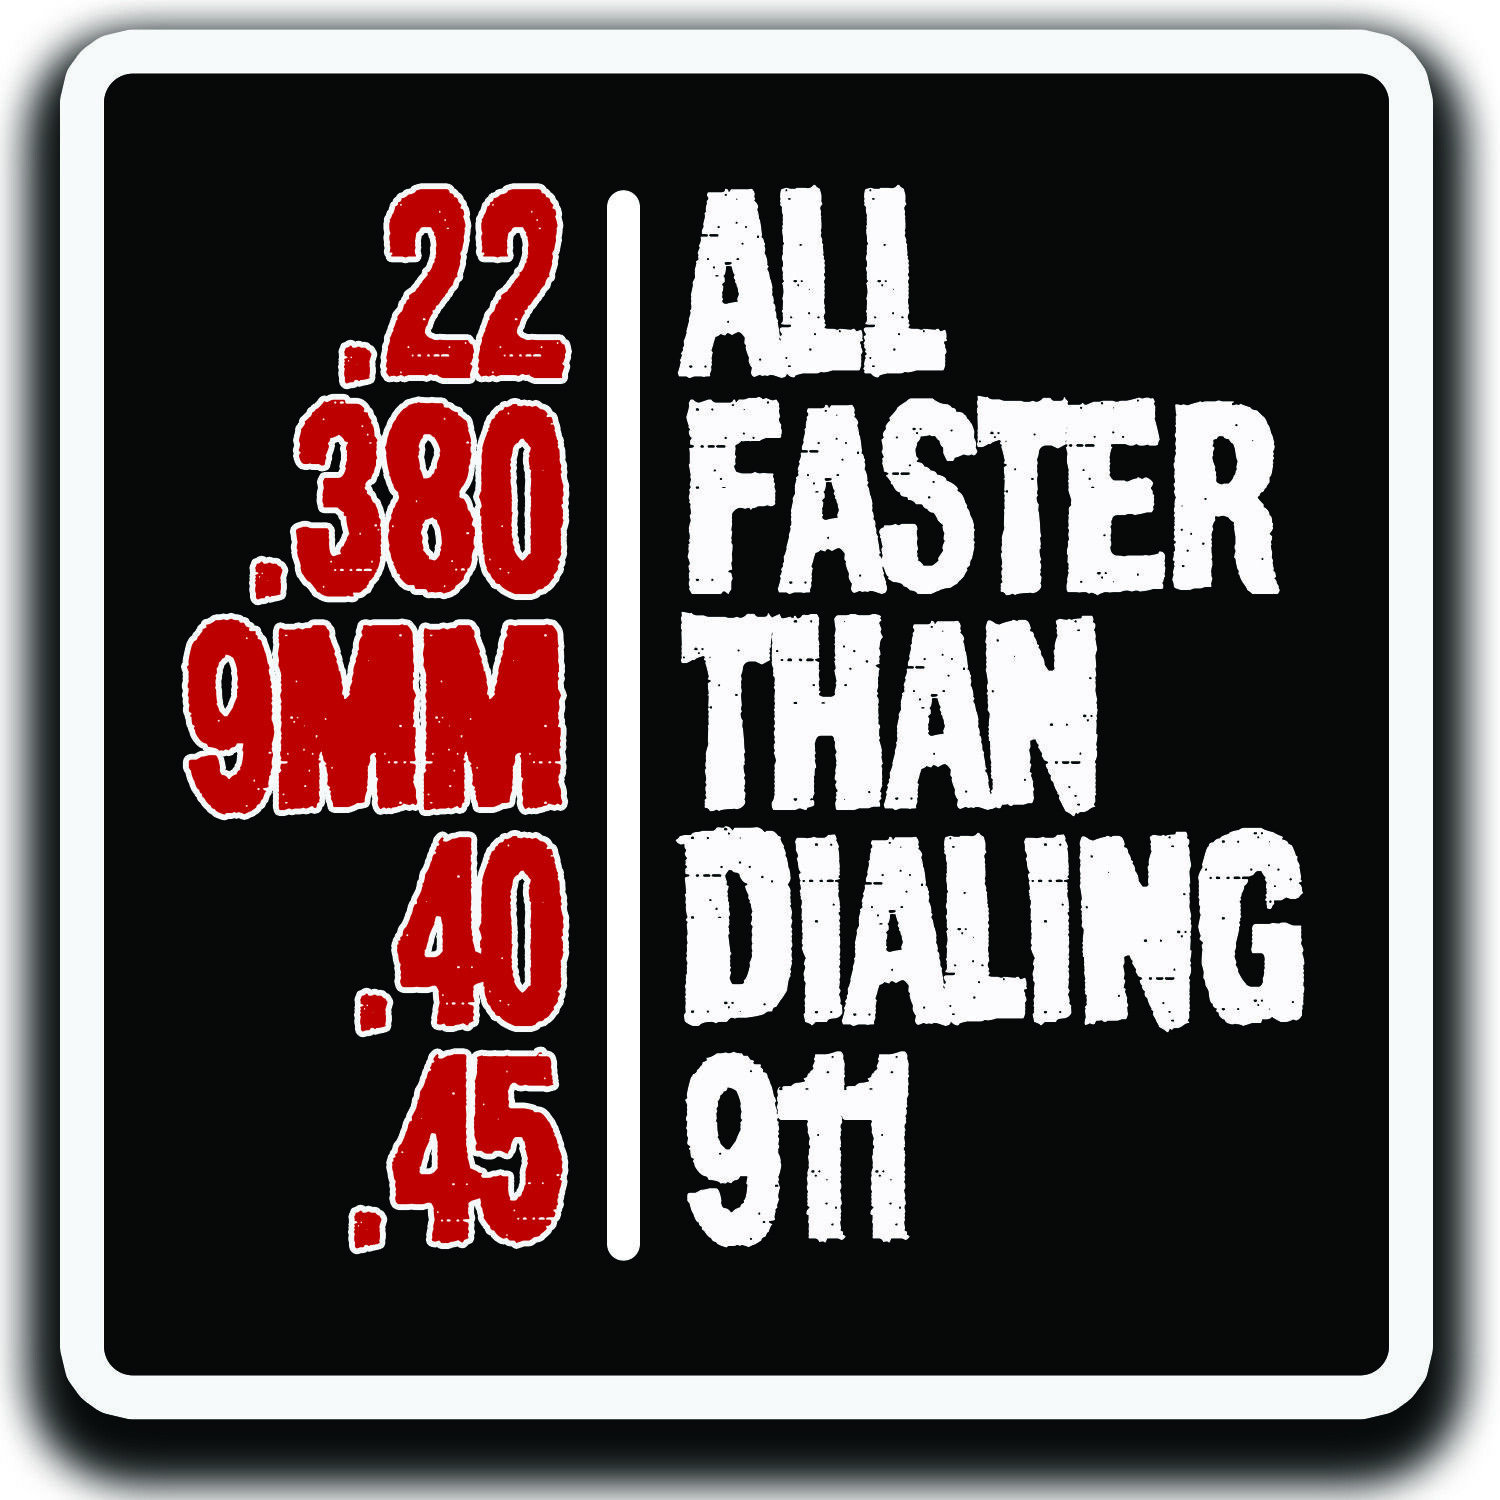 All Faster Than Dialing 911 gun rights  Decal Sticker 4